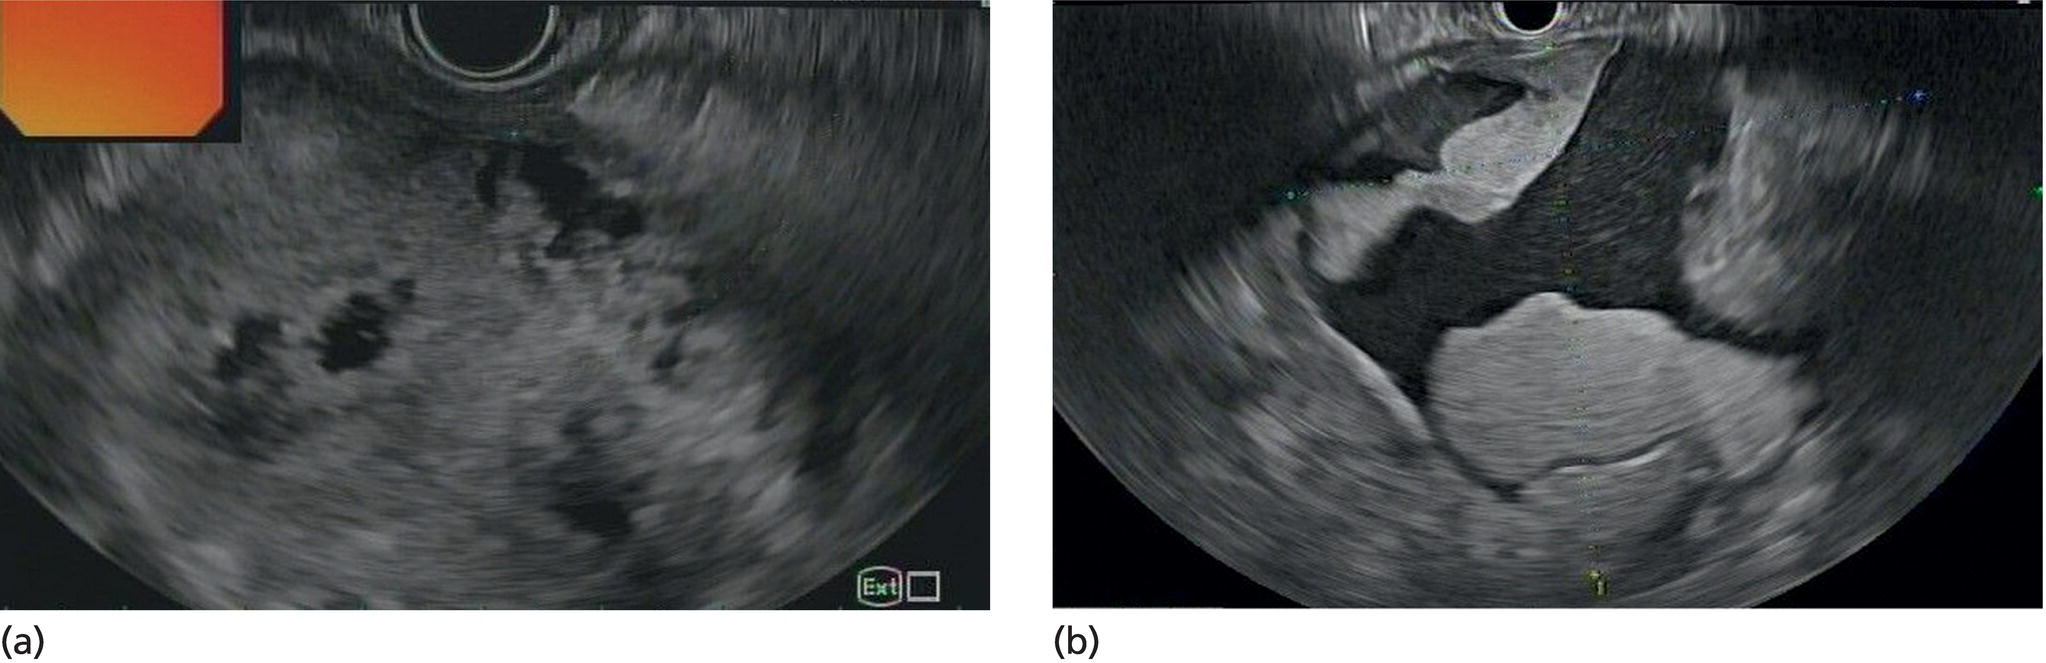 Photos depict (a, b) Hyperechoic and isoechoic solid necrosis within necrotic collections.